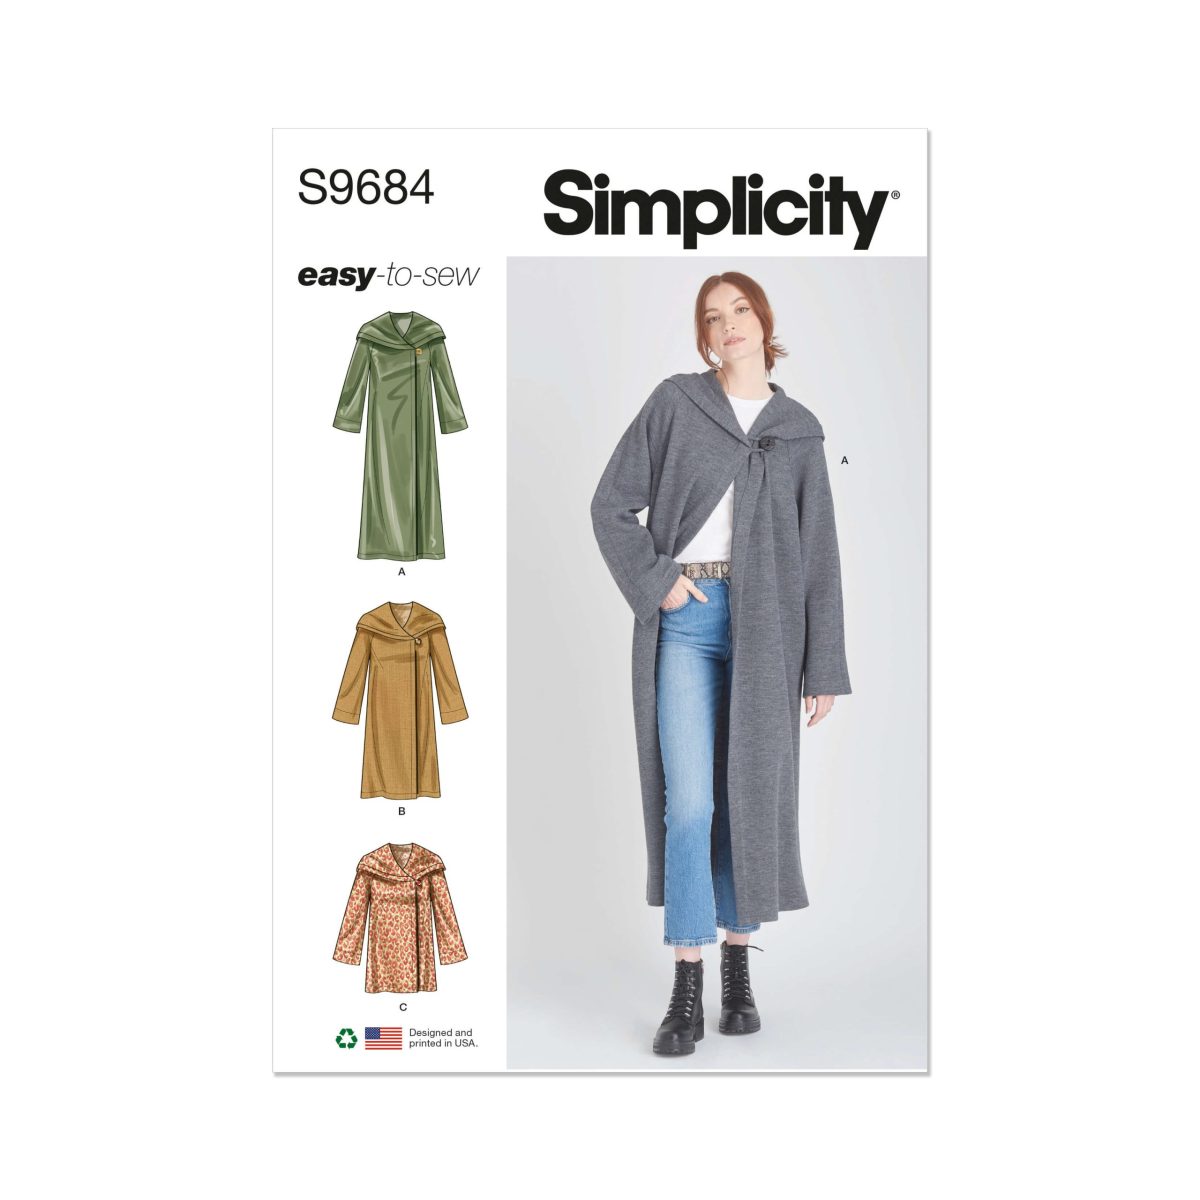 Simplicity Sewing Pattern S9684 Misses' Hooded Coats and Jacket with Length Variations